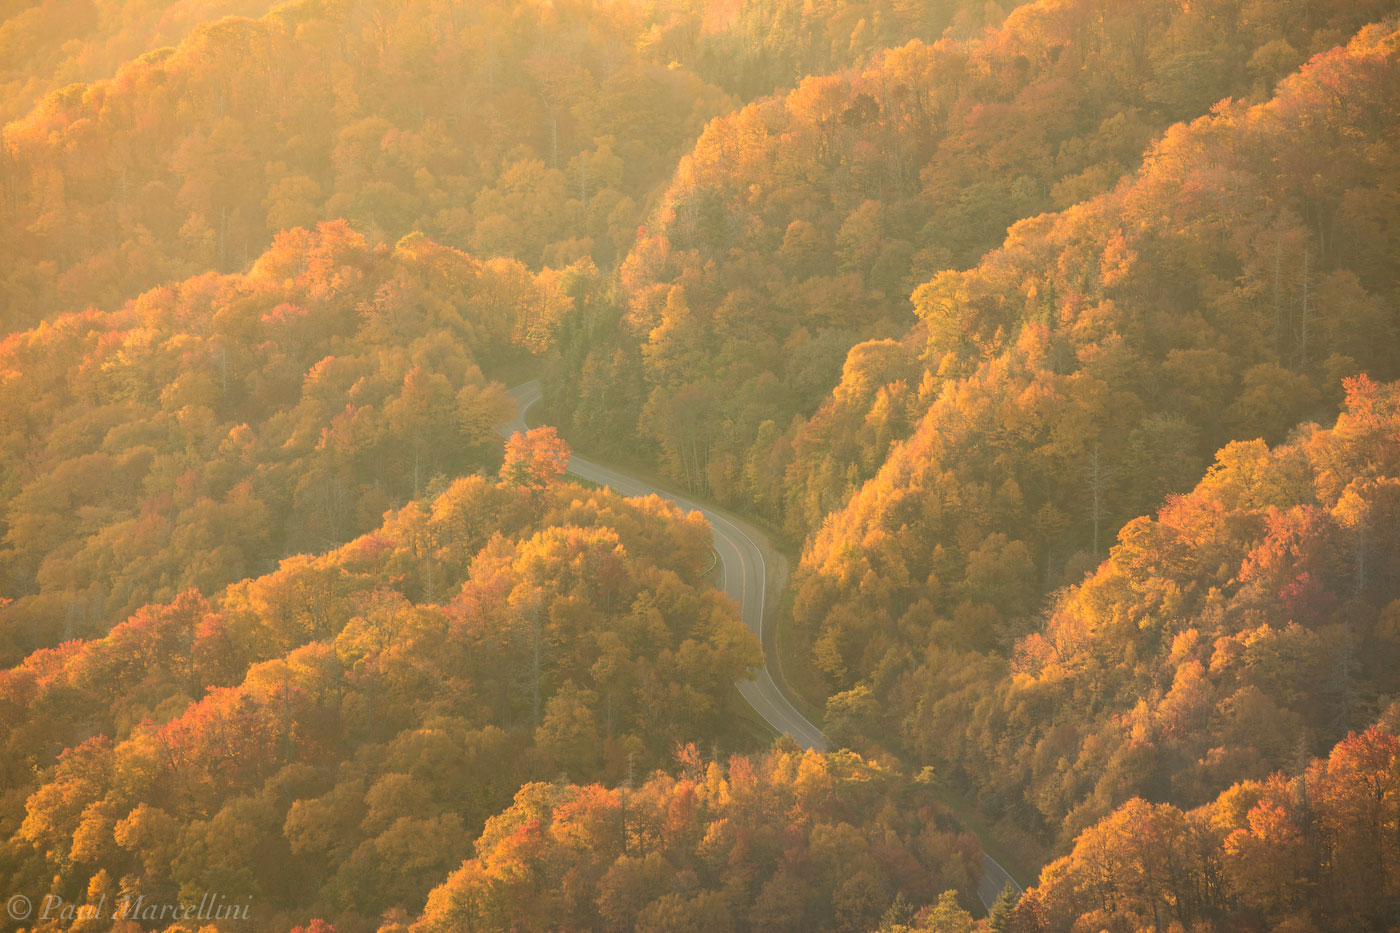 A road cuts through the ridges of the Appalachians on the North Carolina side of the Smokies.